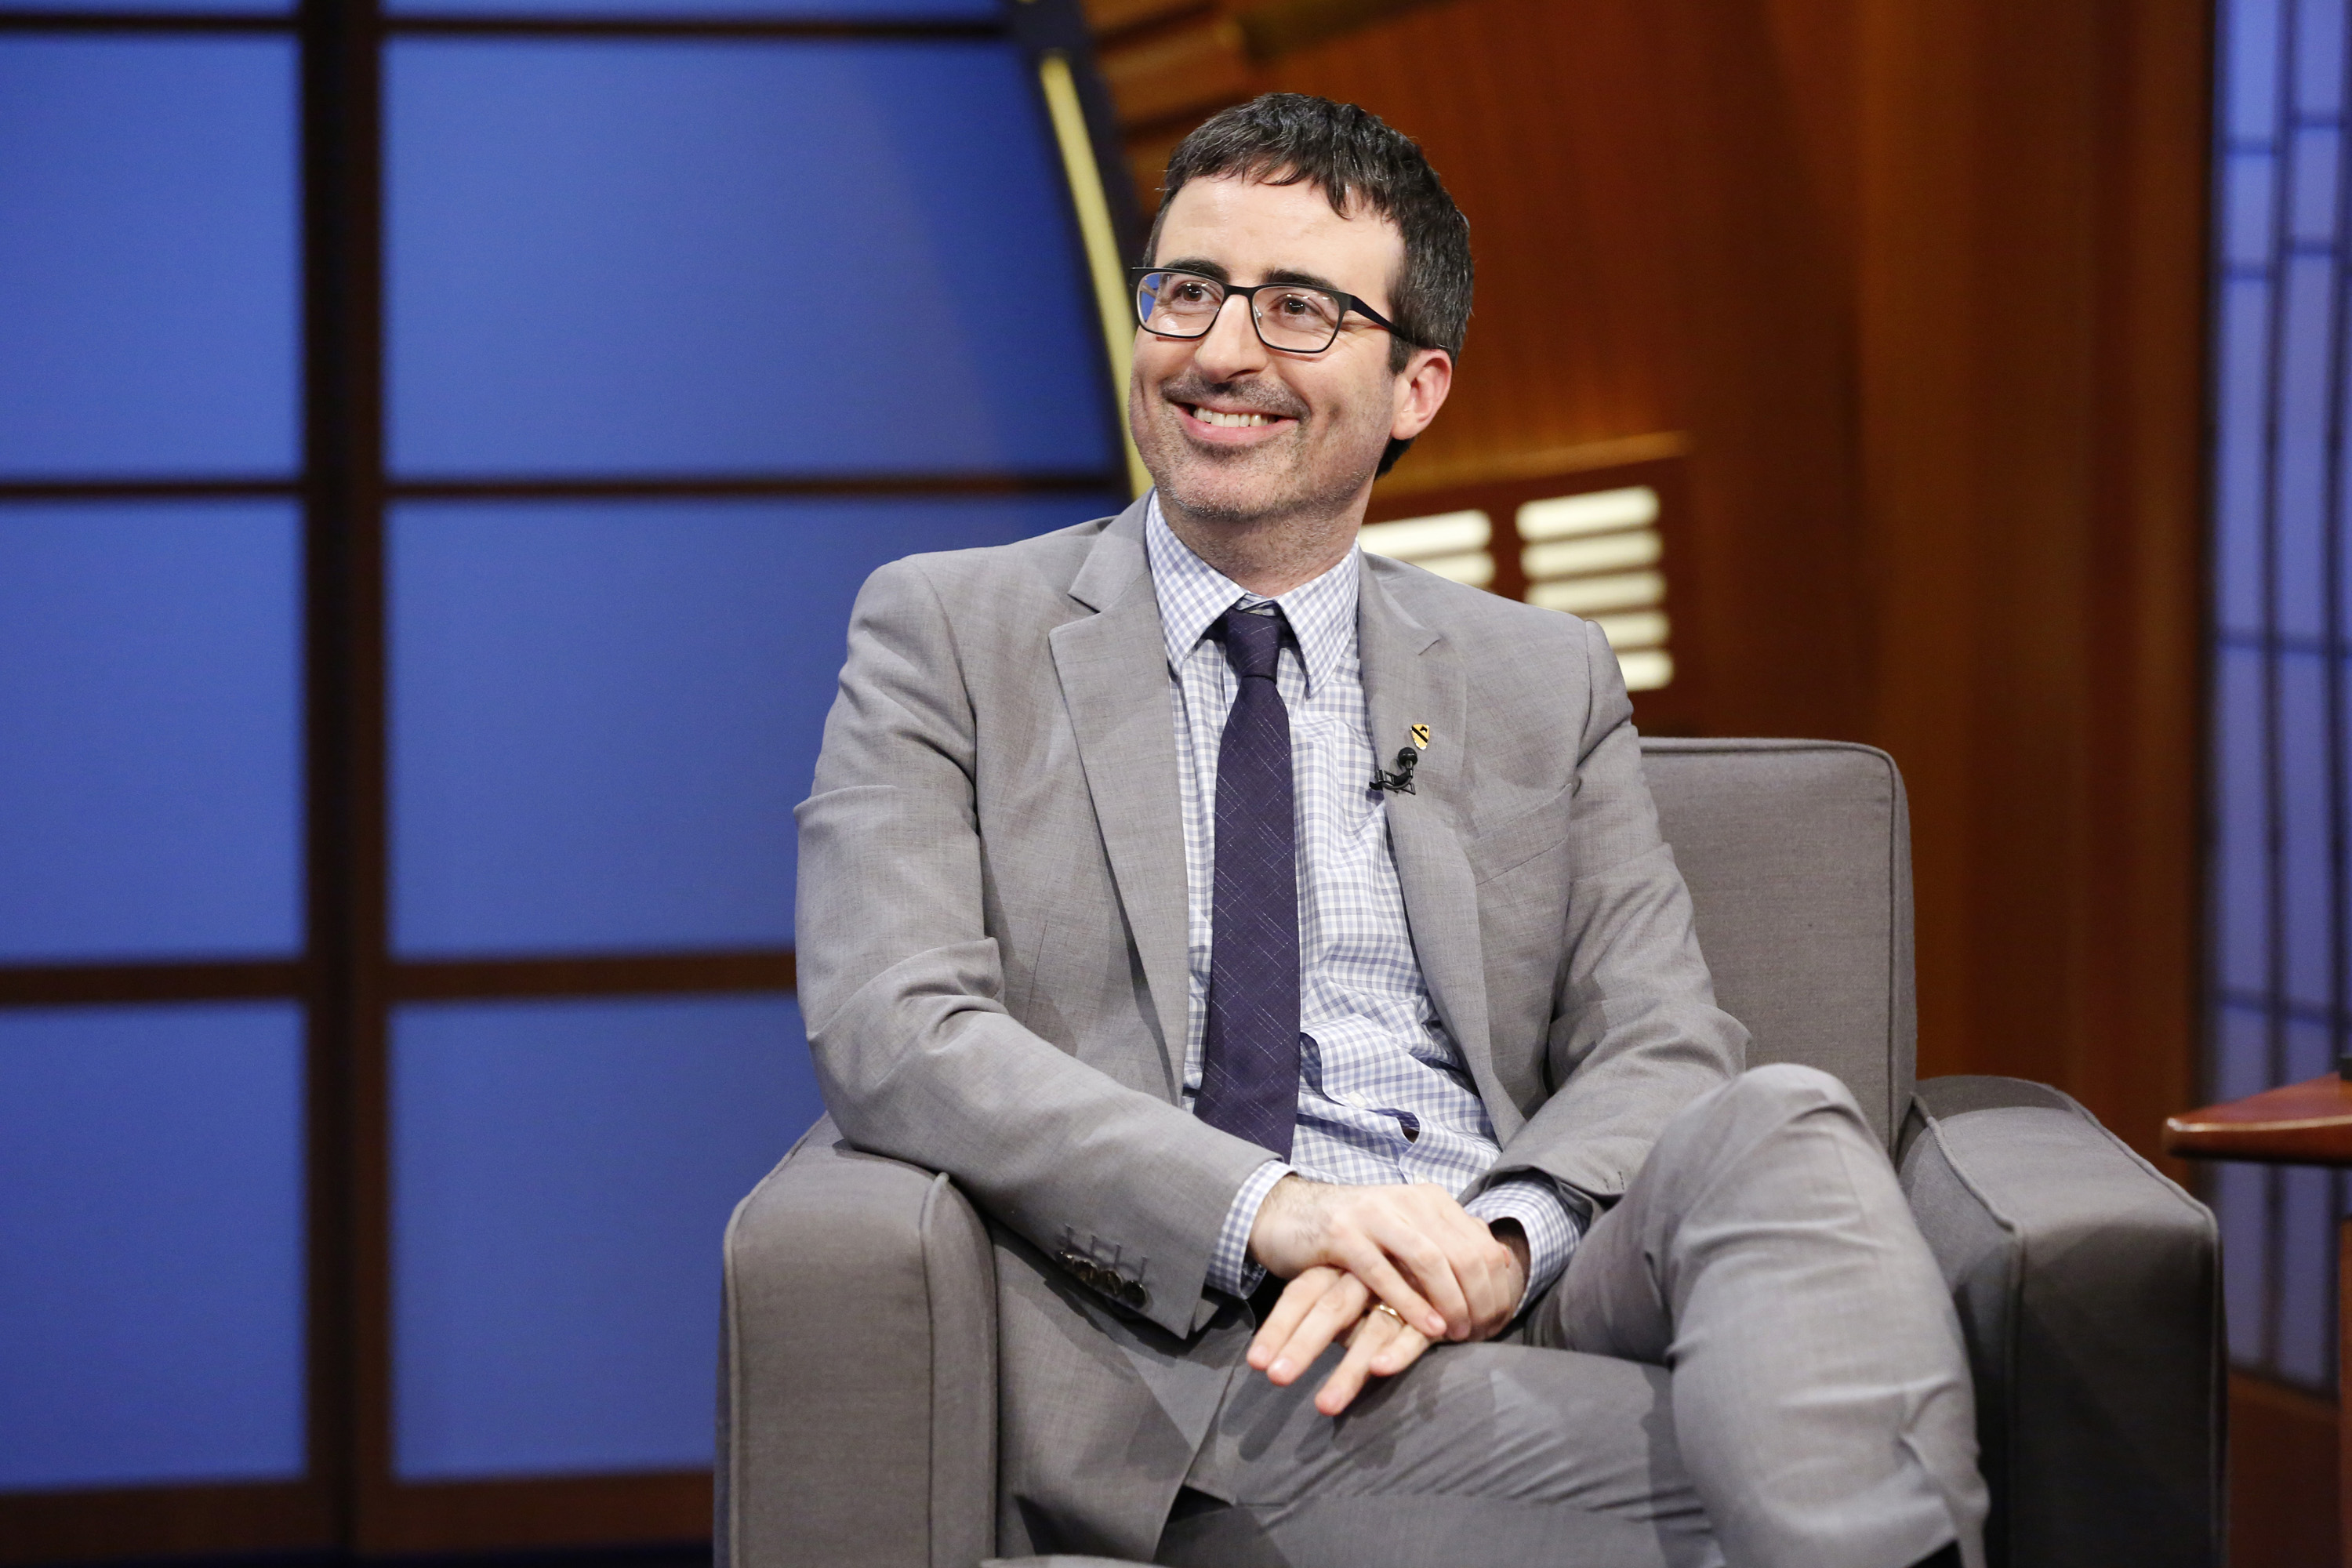 Comedian John Oliver during an interview on June 11, 2014. (NBC&amp;mdash;NBCU Photo Bank via Getty Images)